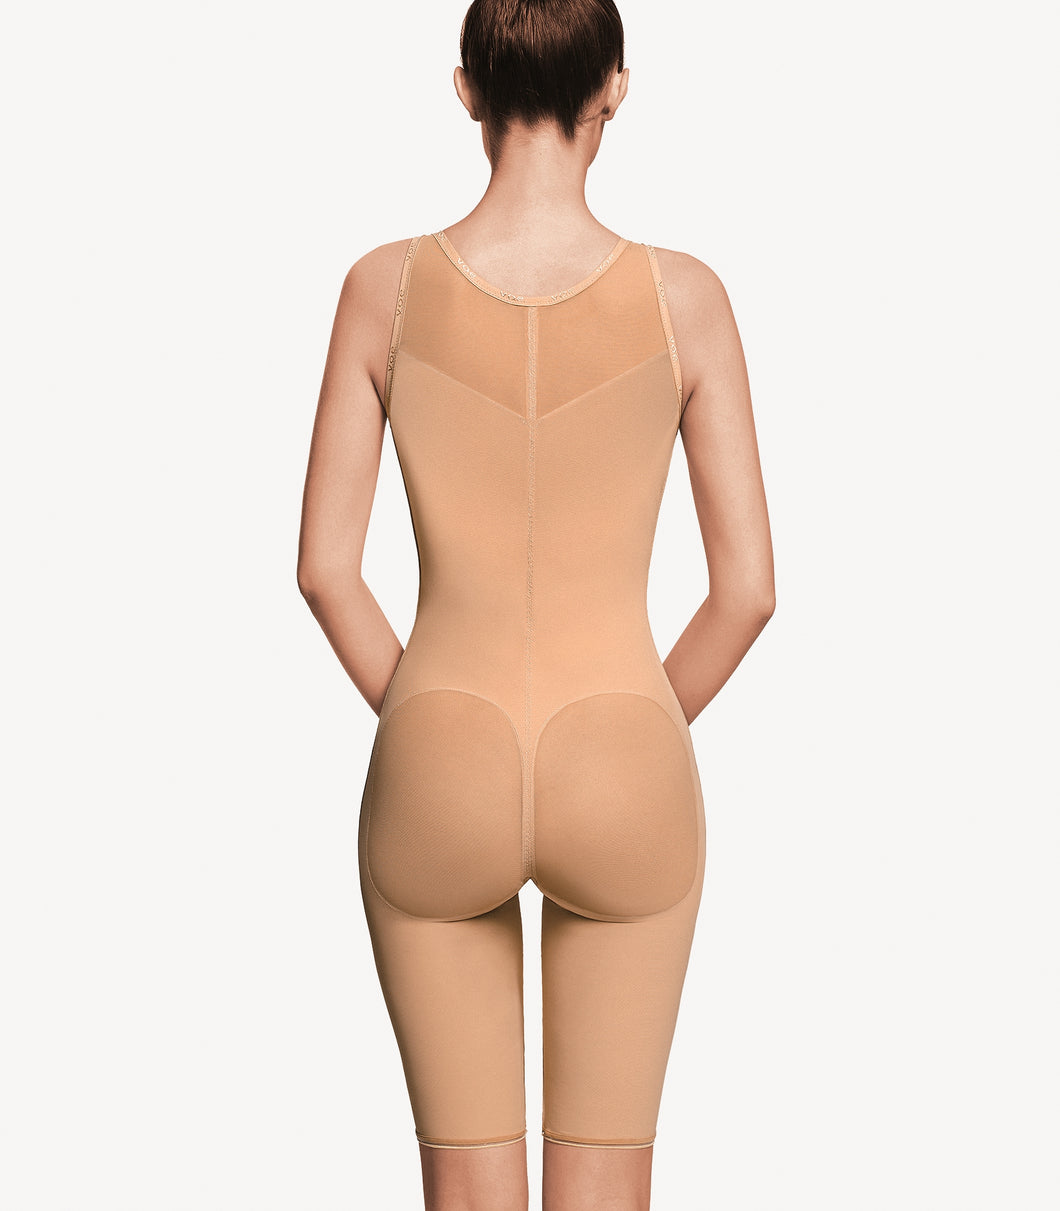 Fat transfer to buttocks girdle high waisted with extended upper back above the knee - Plasmetics healthcare